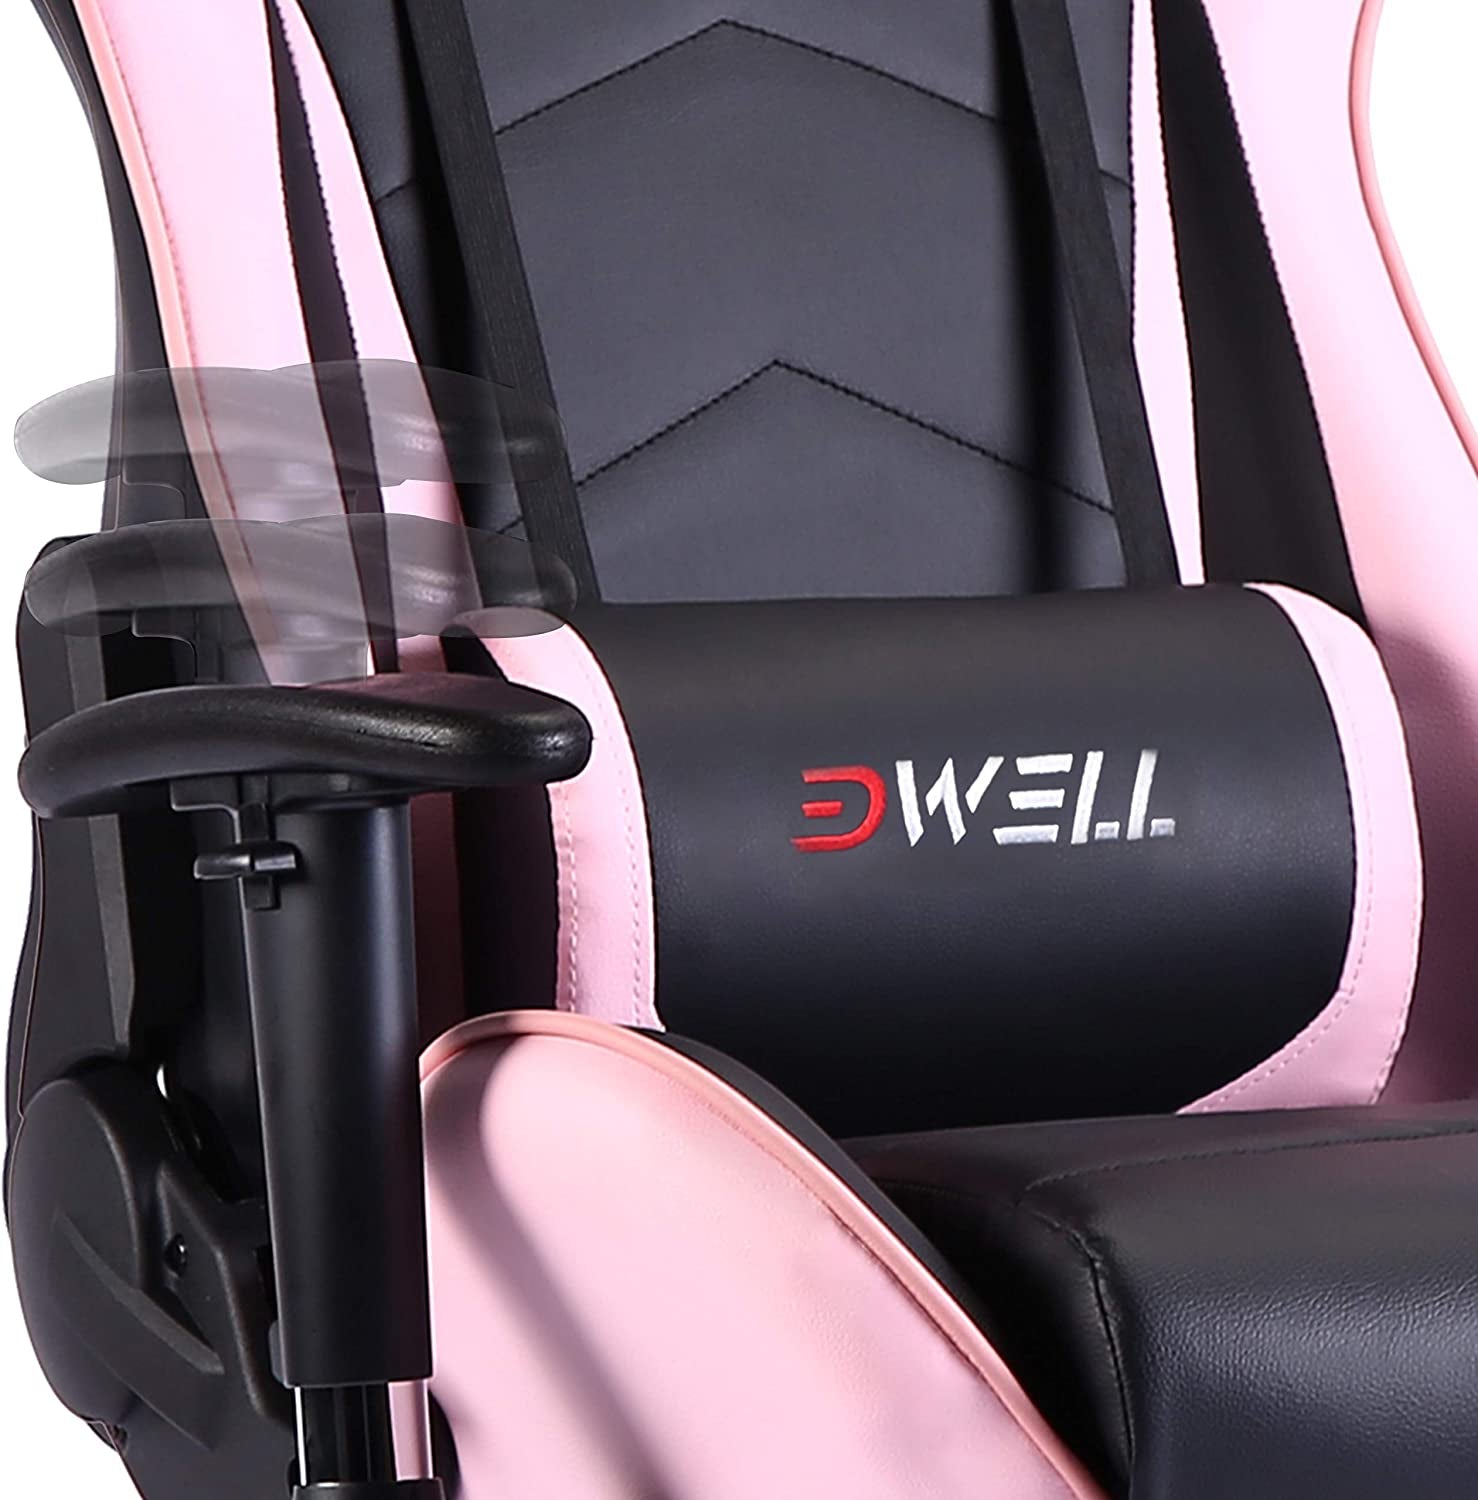 Pink Gaming Chair Ergonomic Computer Chair,Office Chair Gaming Massage Chair Gaming Chair with Footrest(Pink)